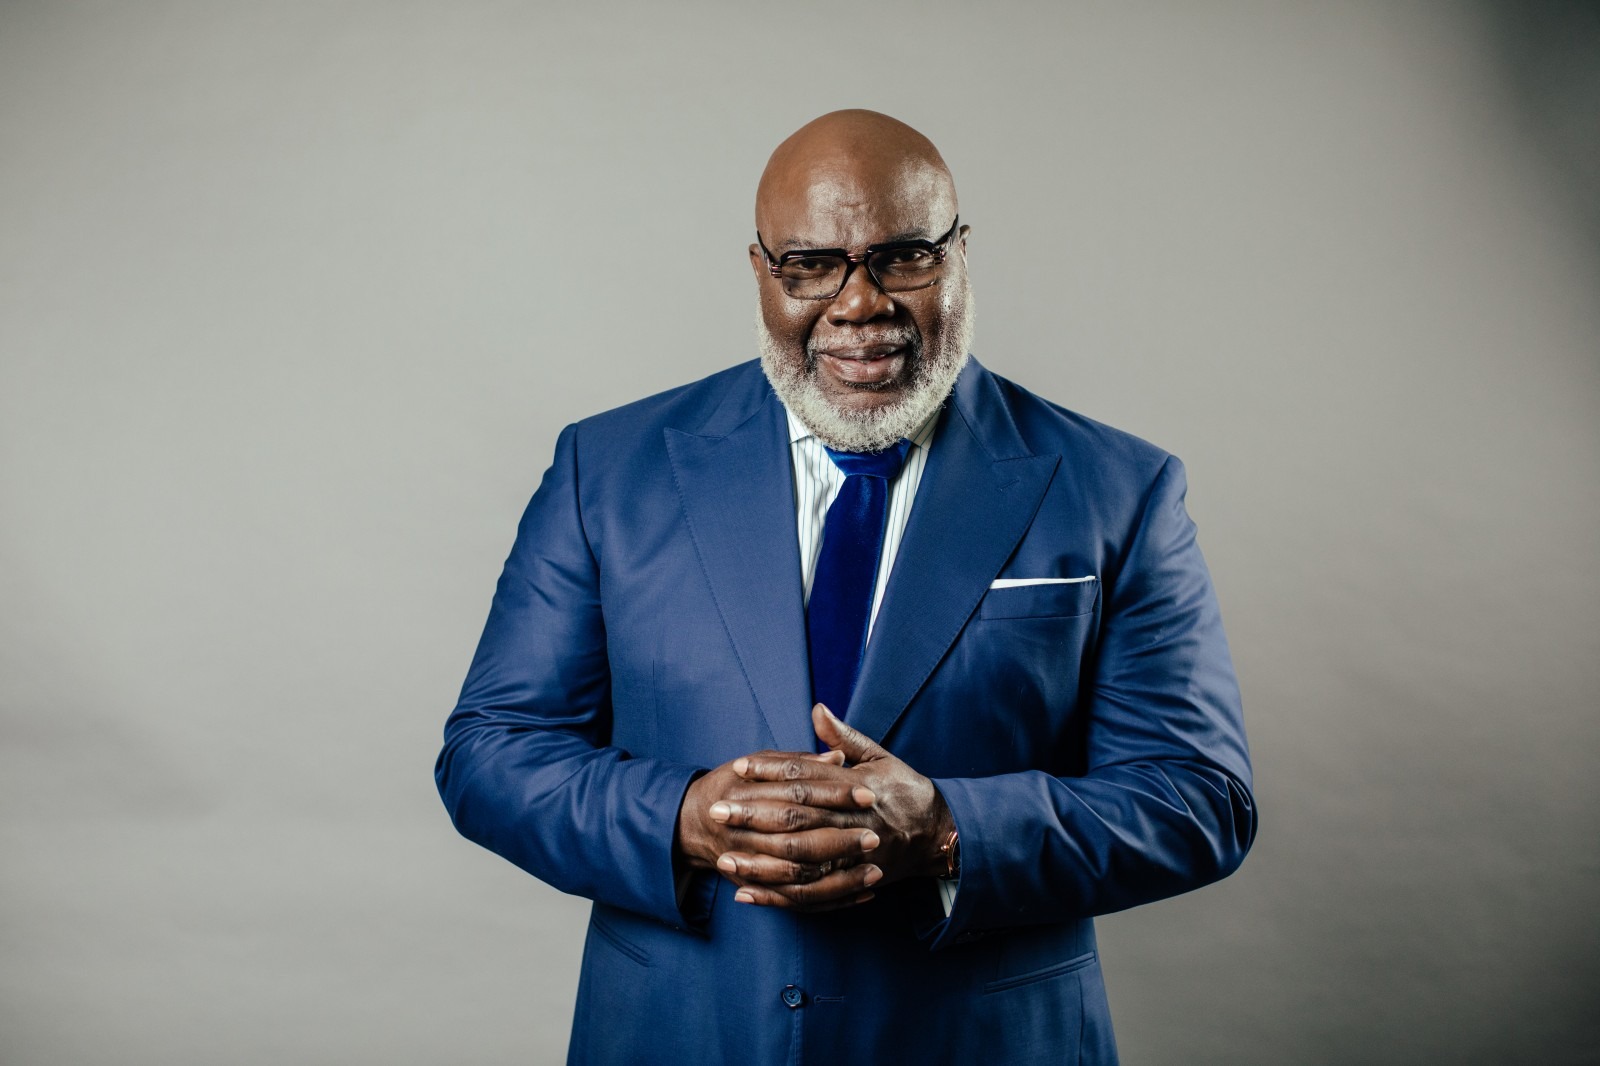 Comms tips from T.D. Jakes